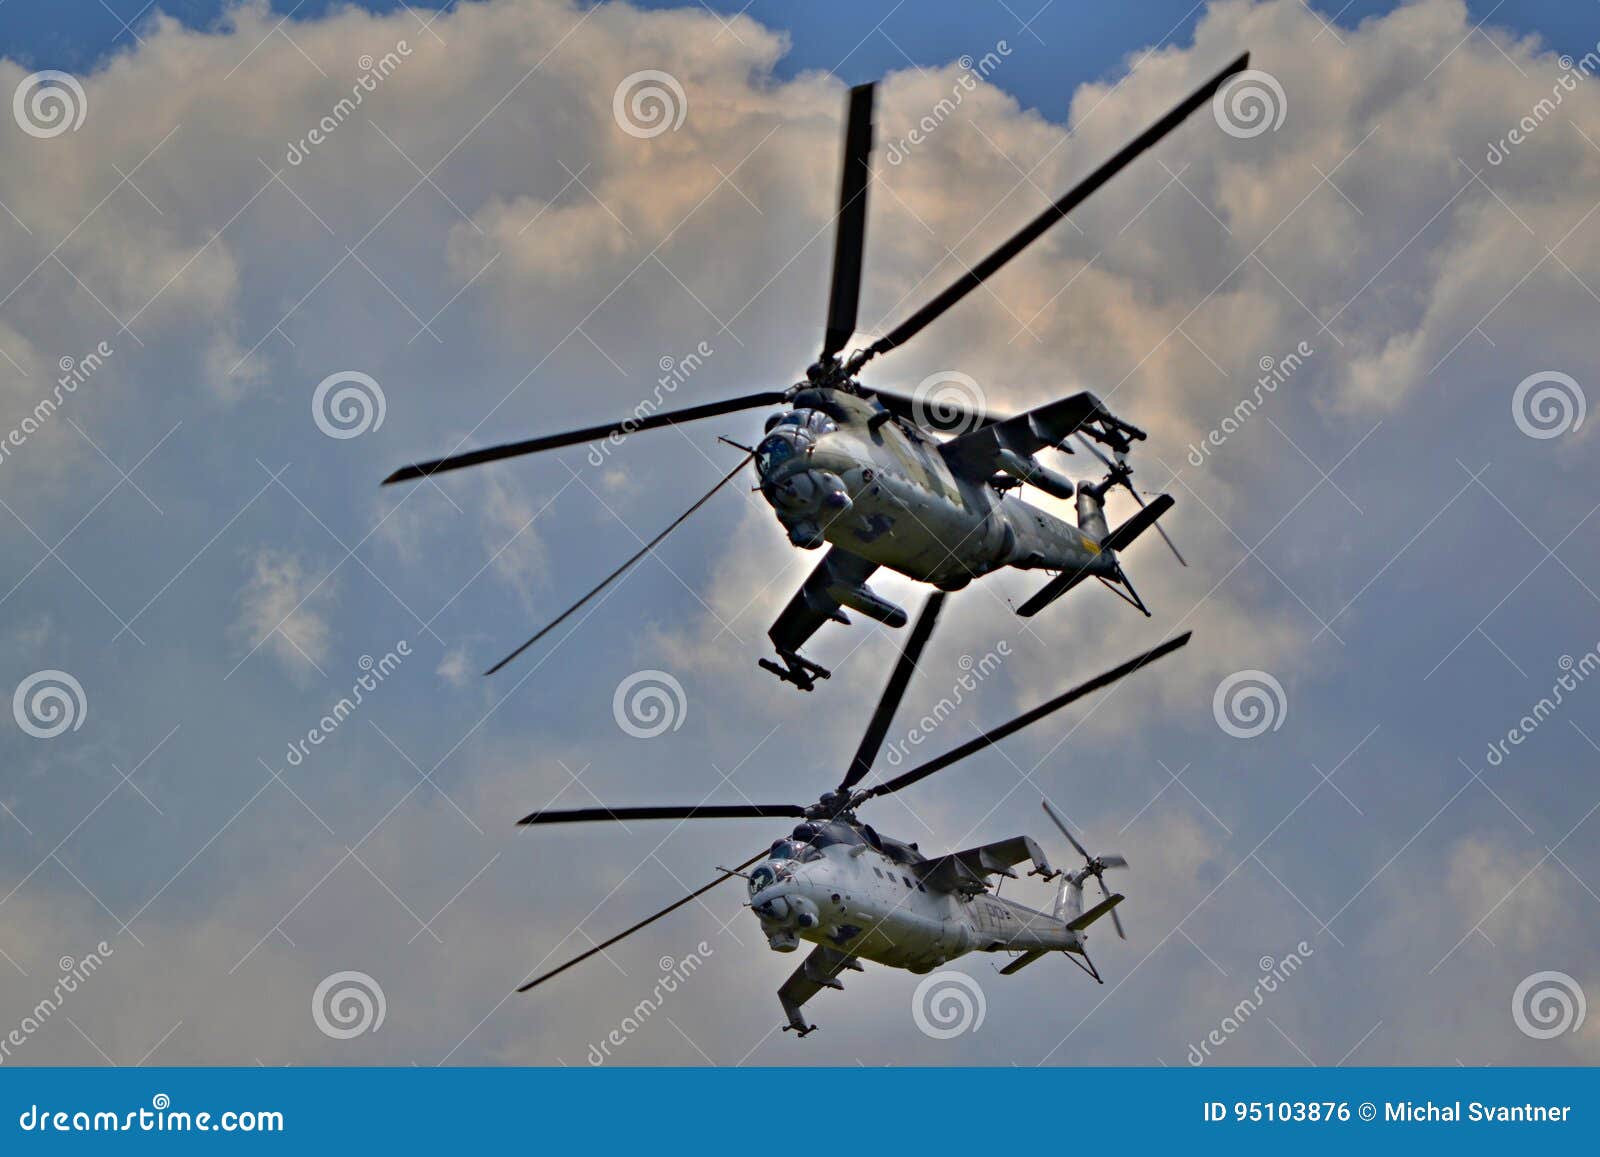 Two Military Helicopters Flying Together Army and Military Technology